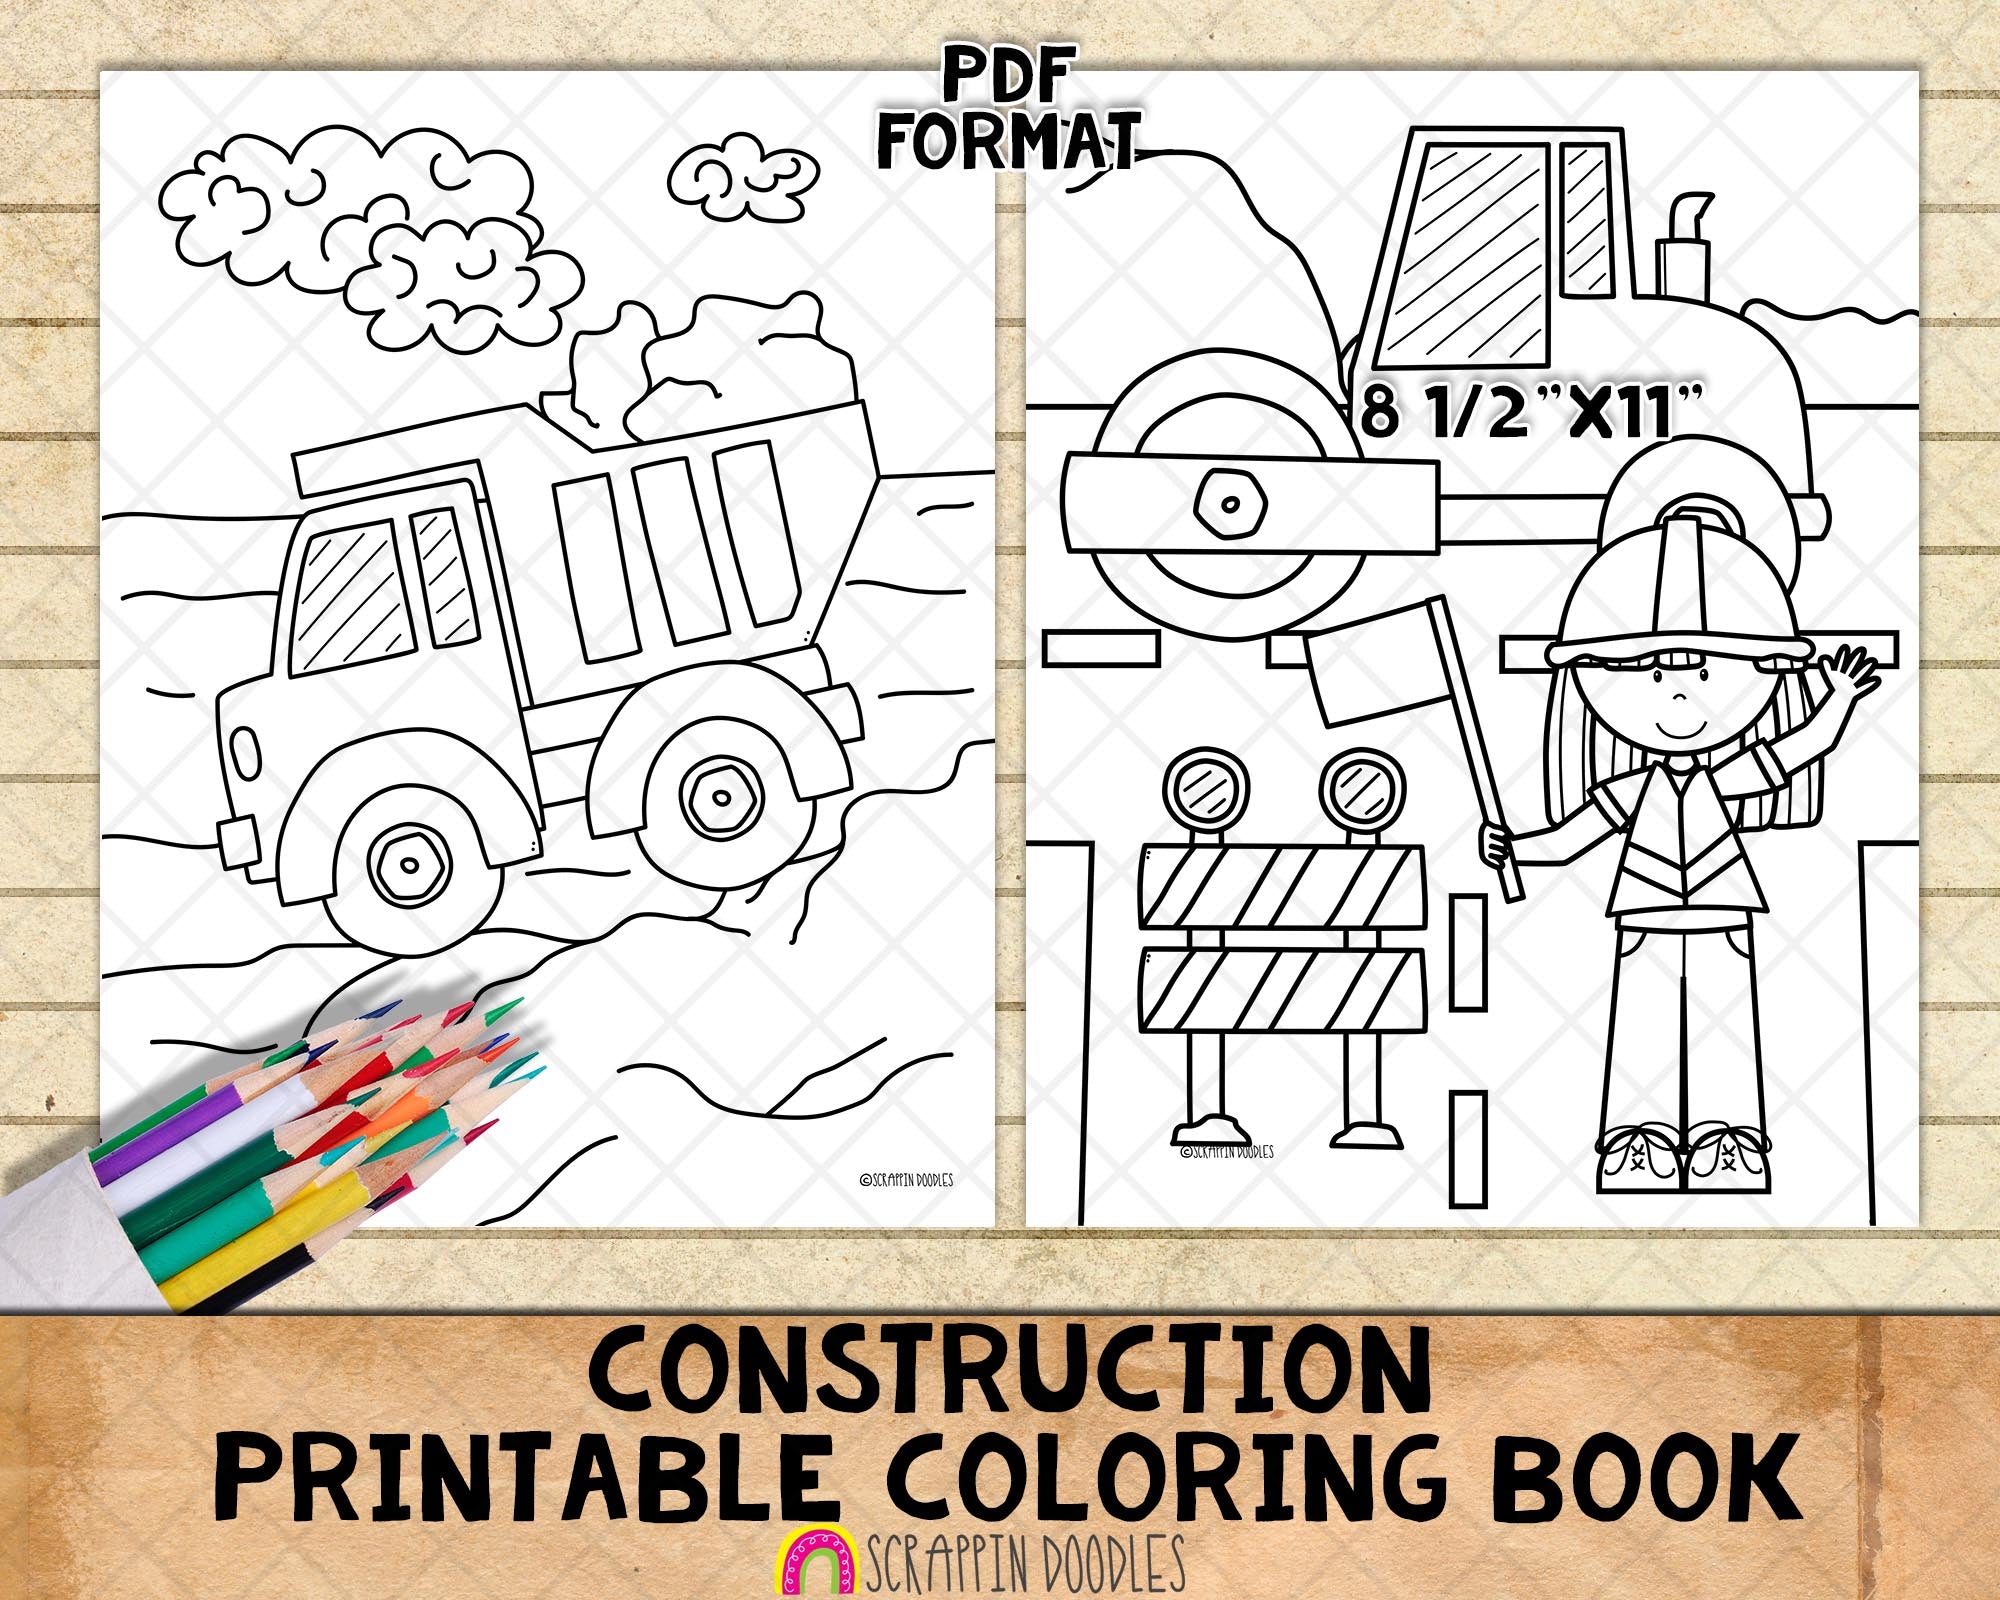 Construction coloring book